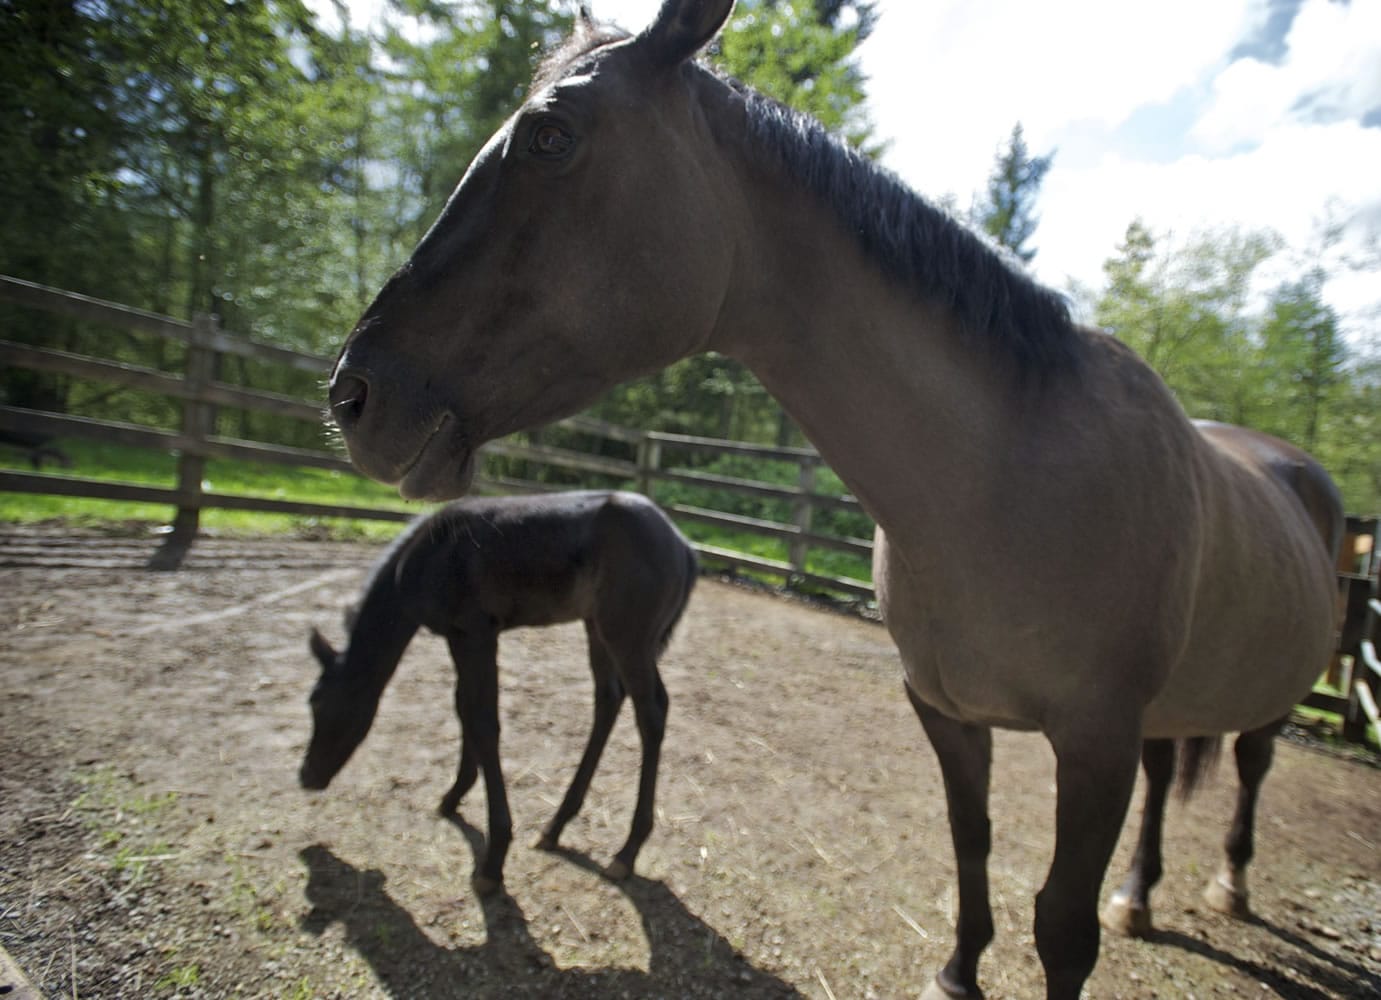 Pearl and her colt Midnight spend time outside Wednesday at their foster farm.